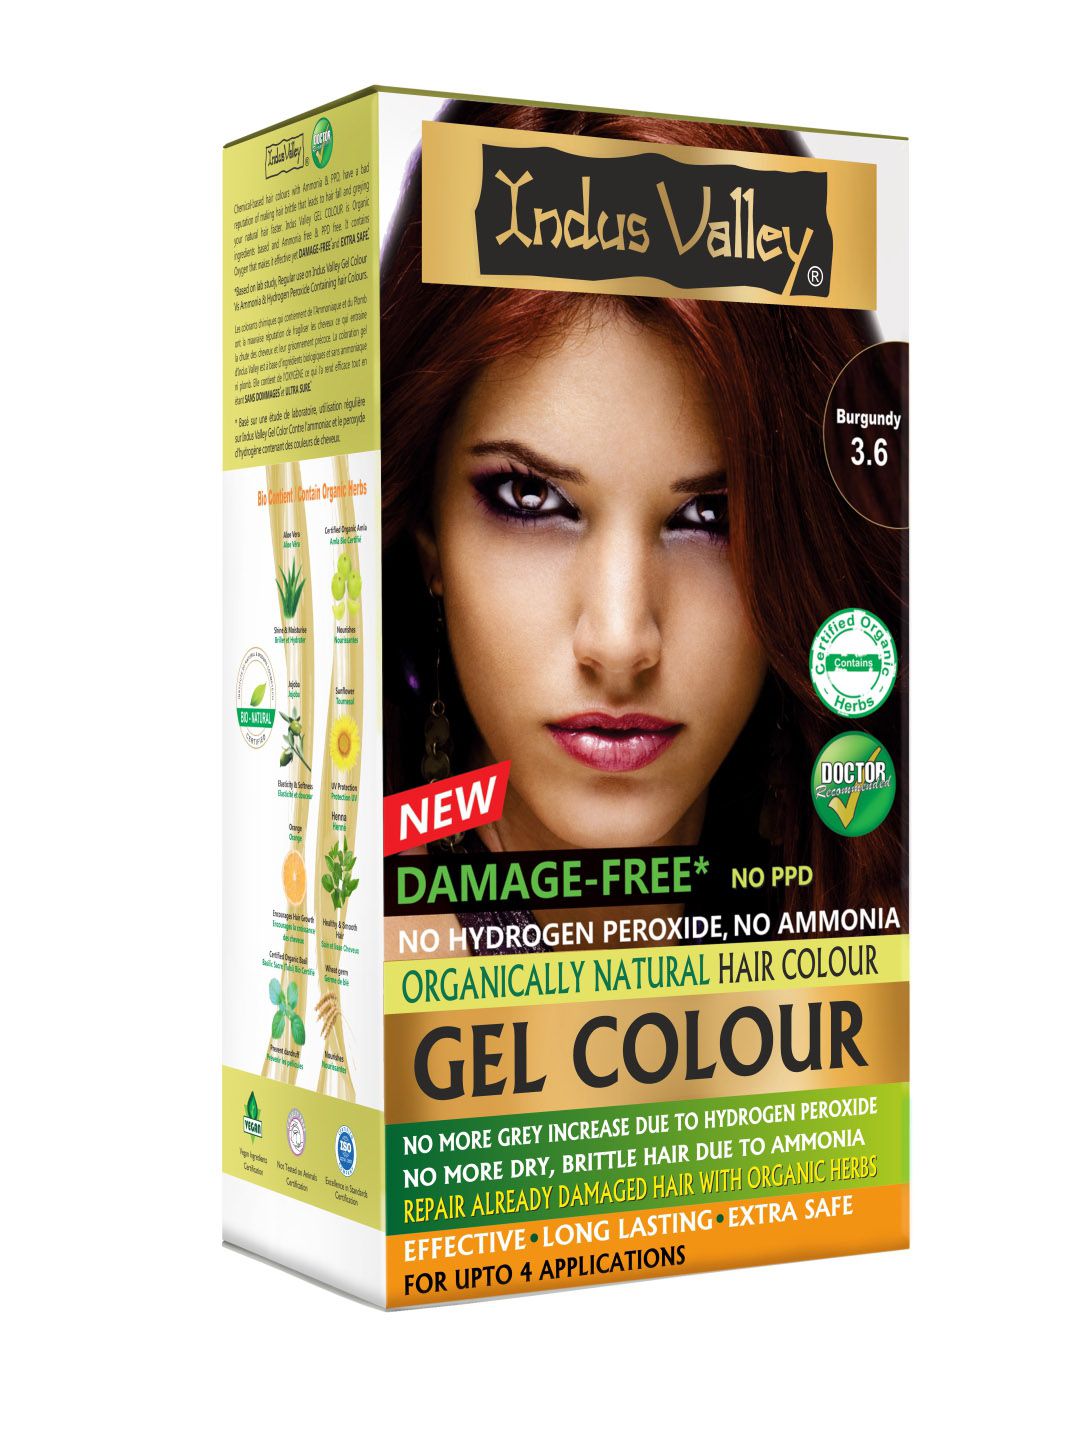 Indus Valley Organically Natural Gel Burgundy 3.6 Hair Color 220 g Price in India